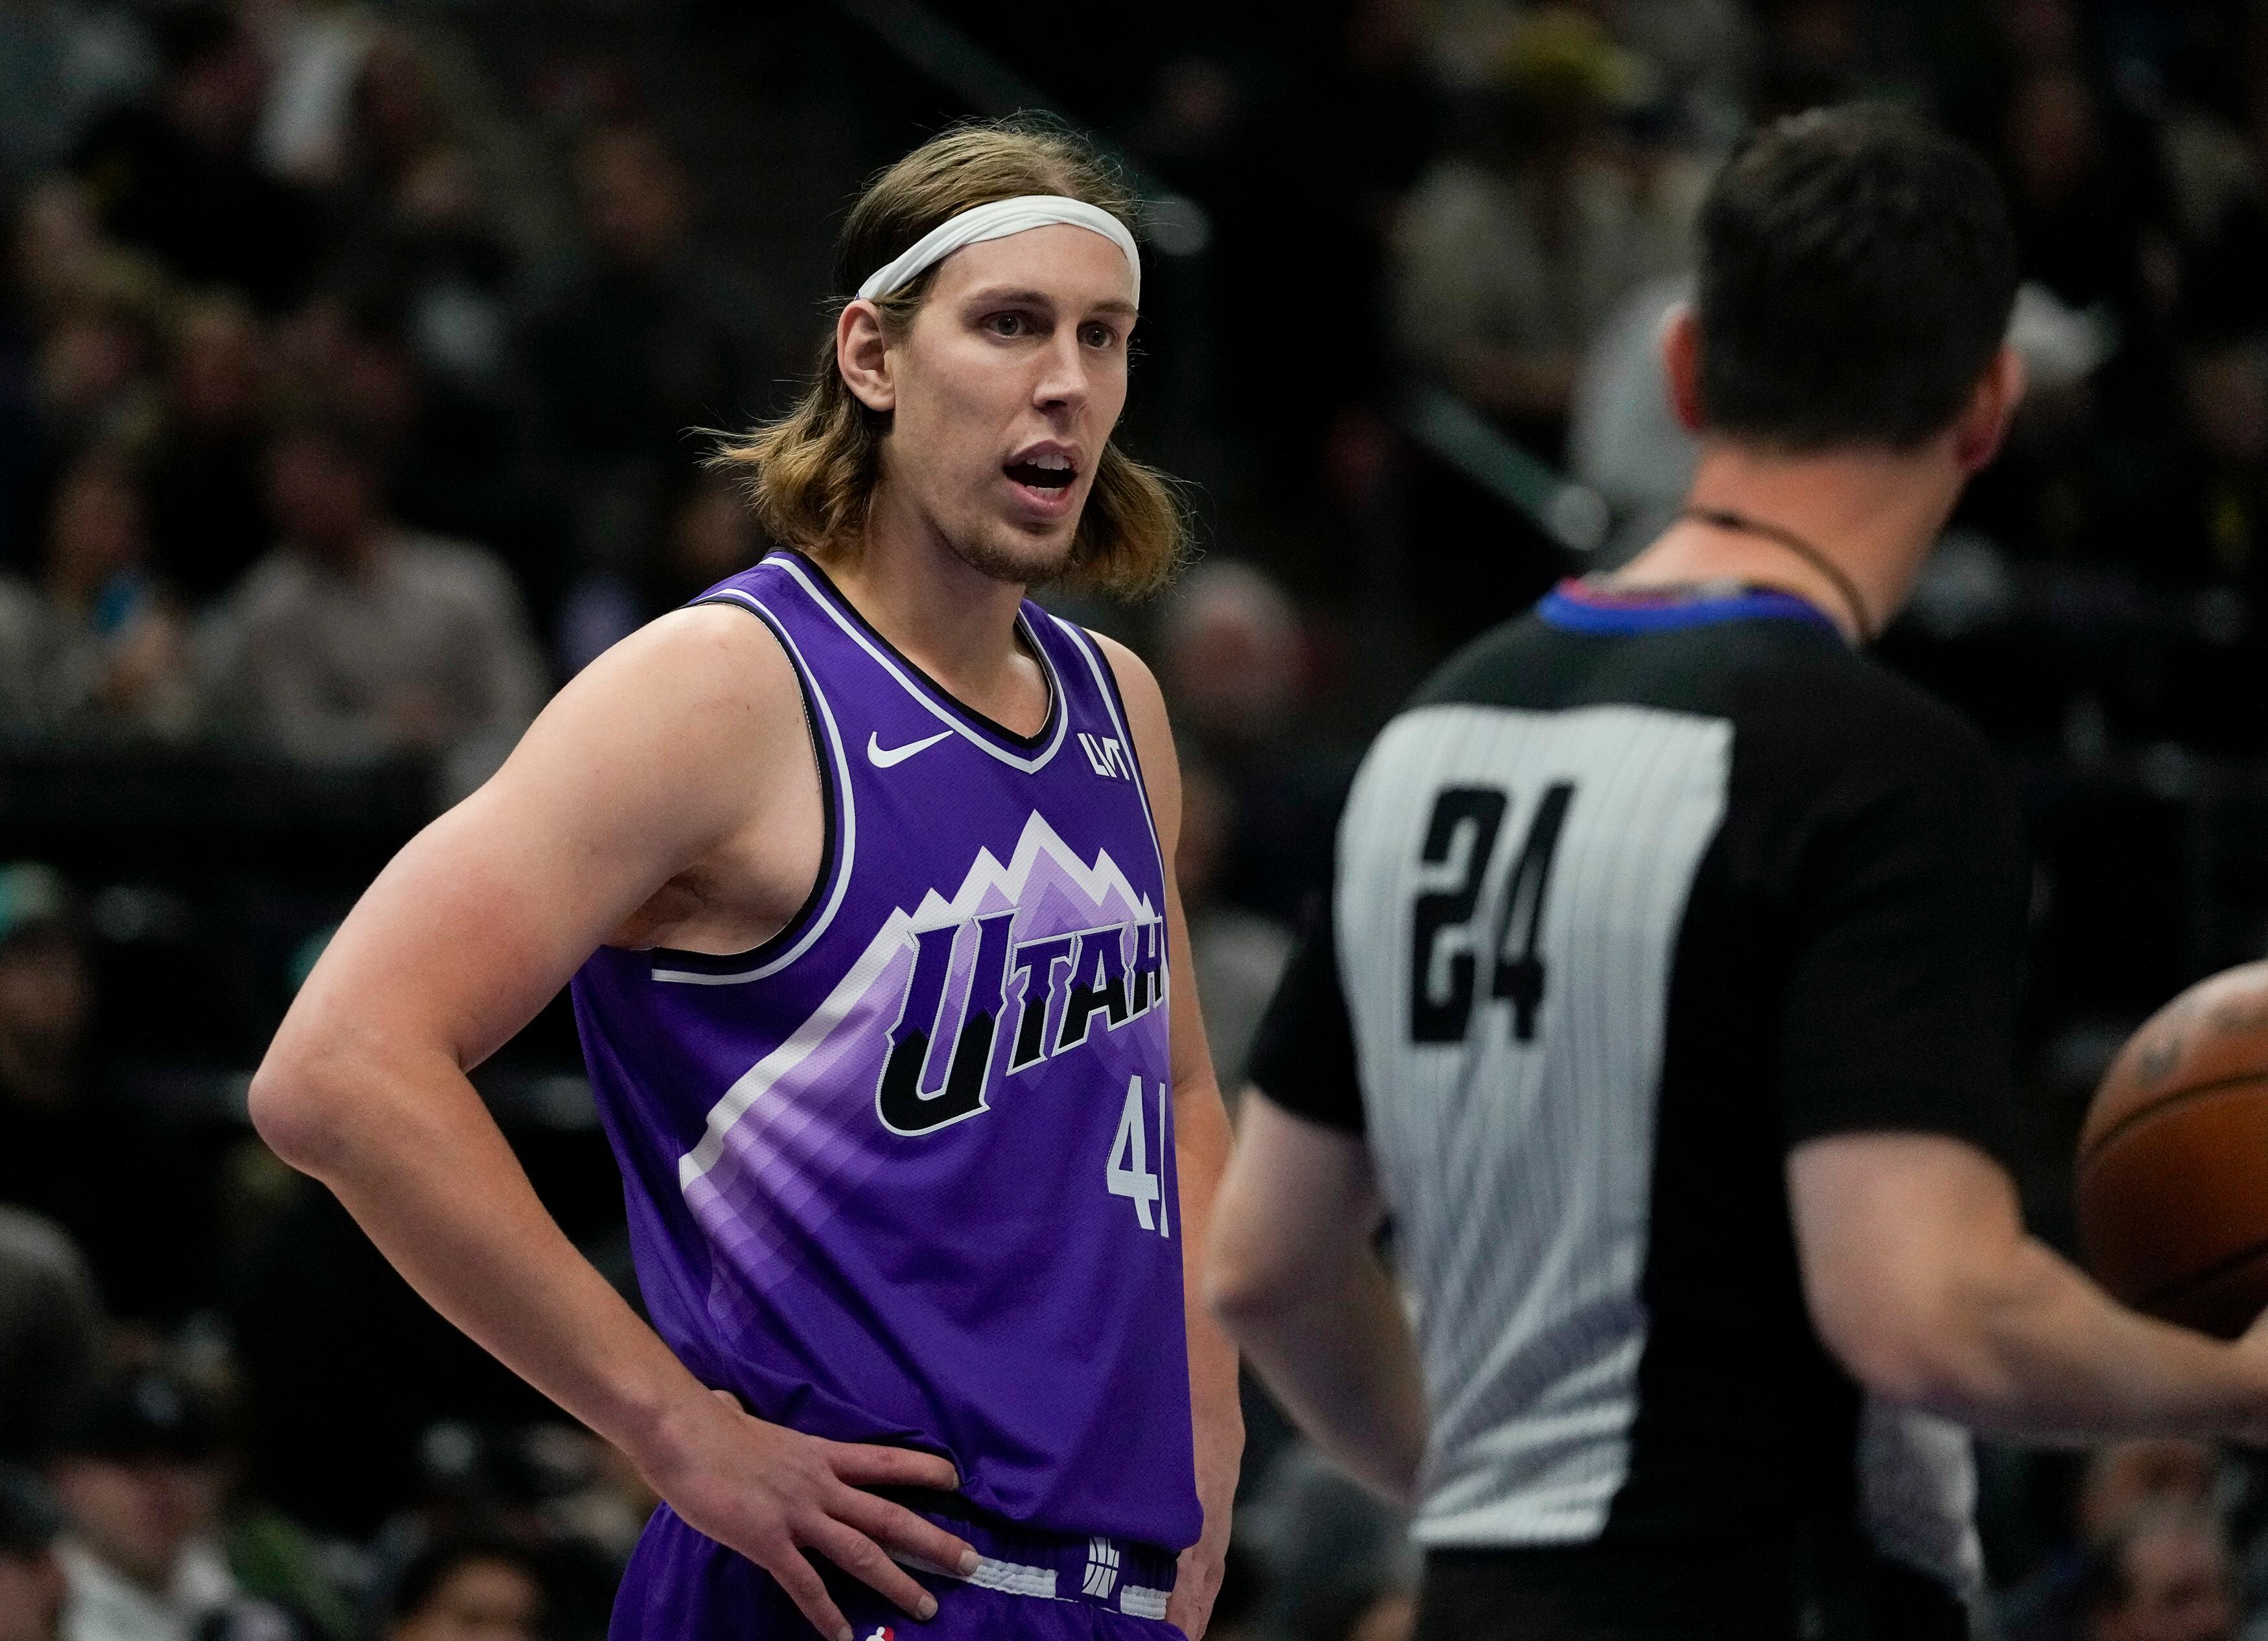 (Bethany Baker | The Salt Lake Tribune) Utah Jazz forward Kelly Olynyk (41) speaks with a referree during the game against the LA Clippers at the Delta Center in Salt Lake City on Friday, Dec. 8, 2023.